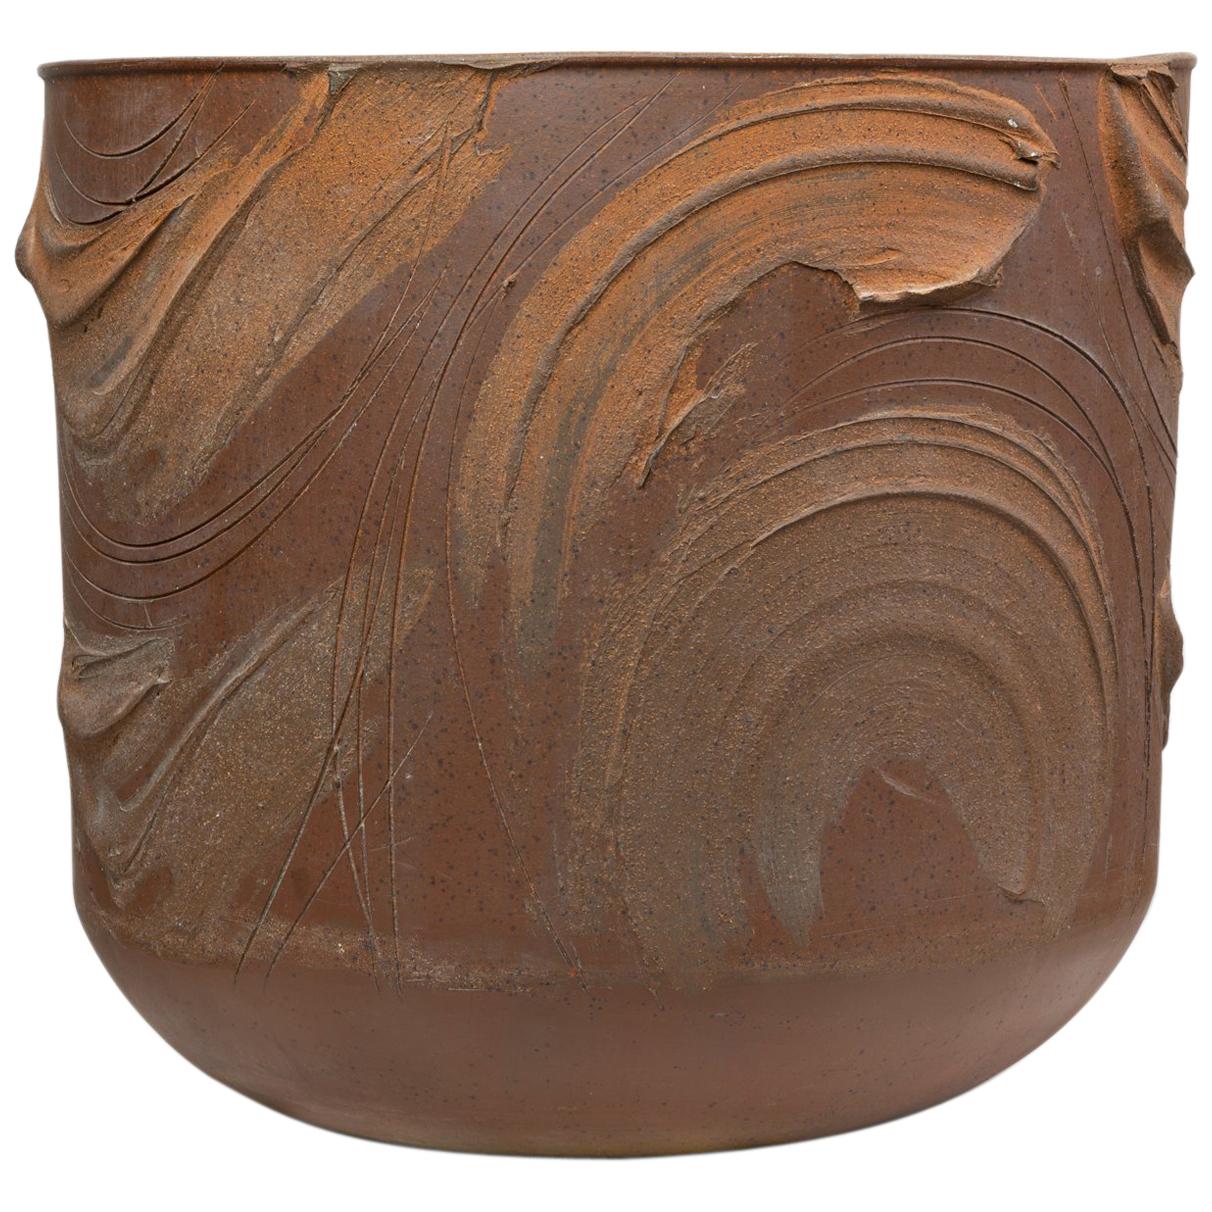 Pro/Artisan “Expressive” Planter by David Cressey for Architectural Pottery